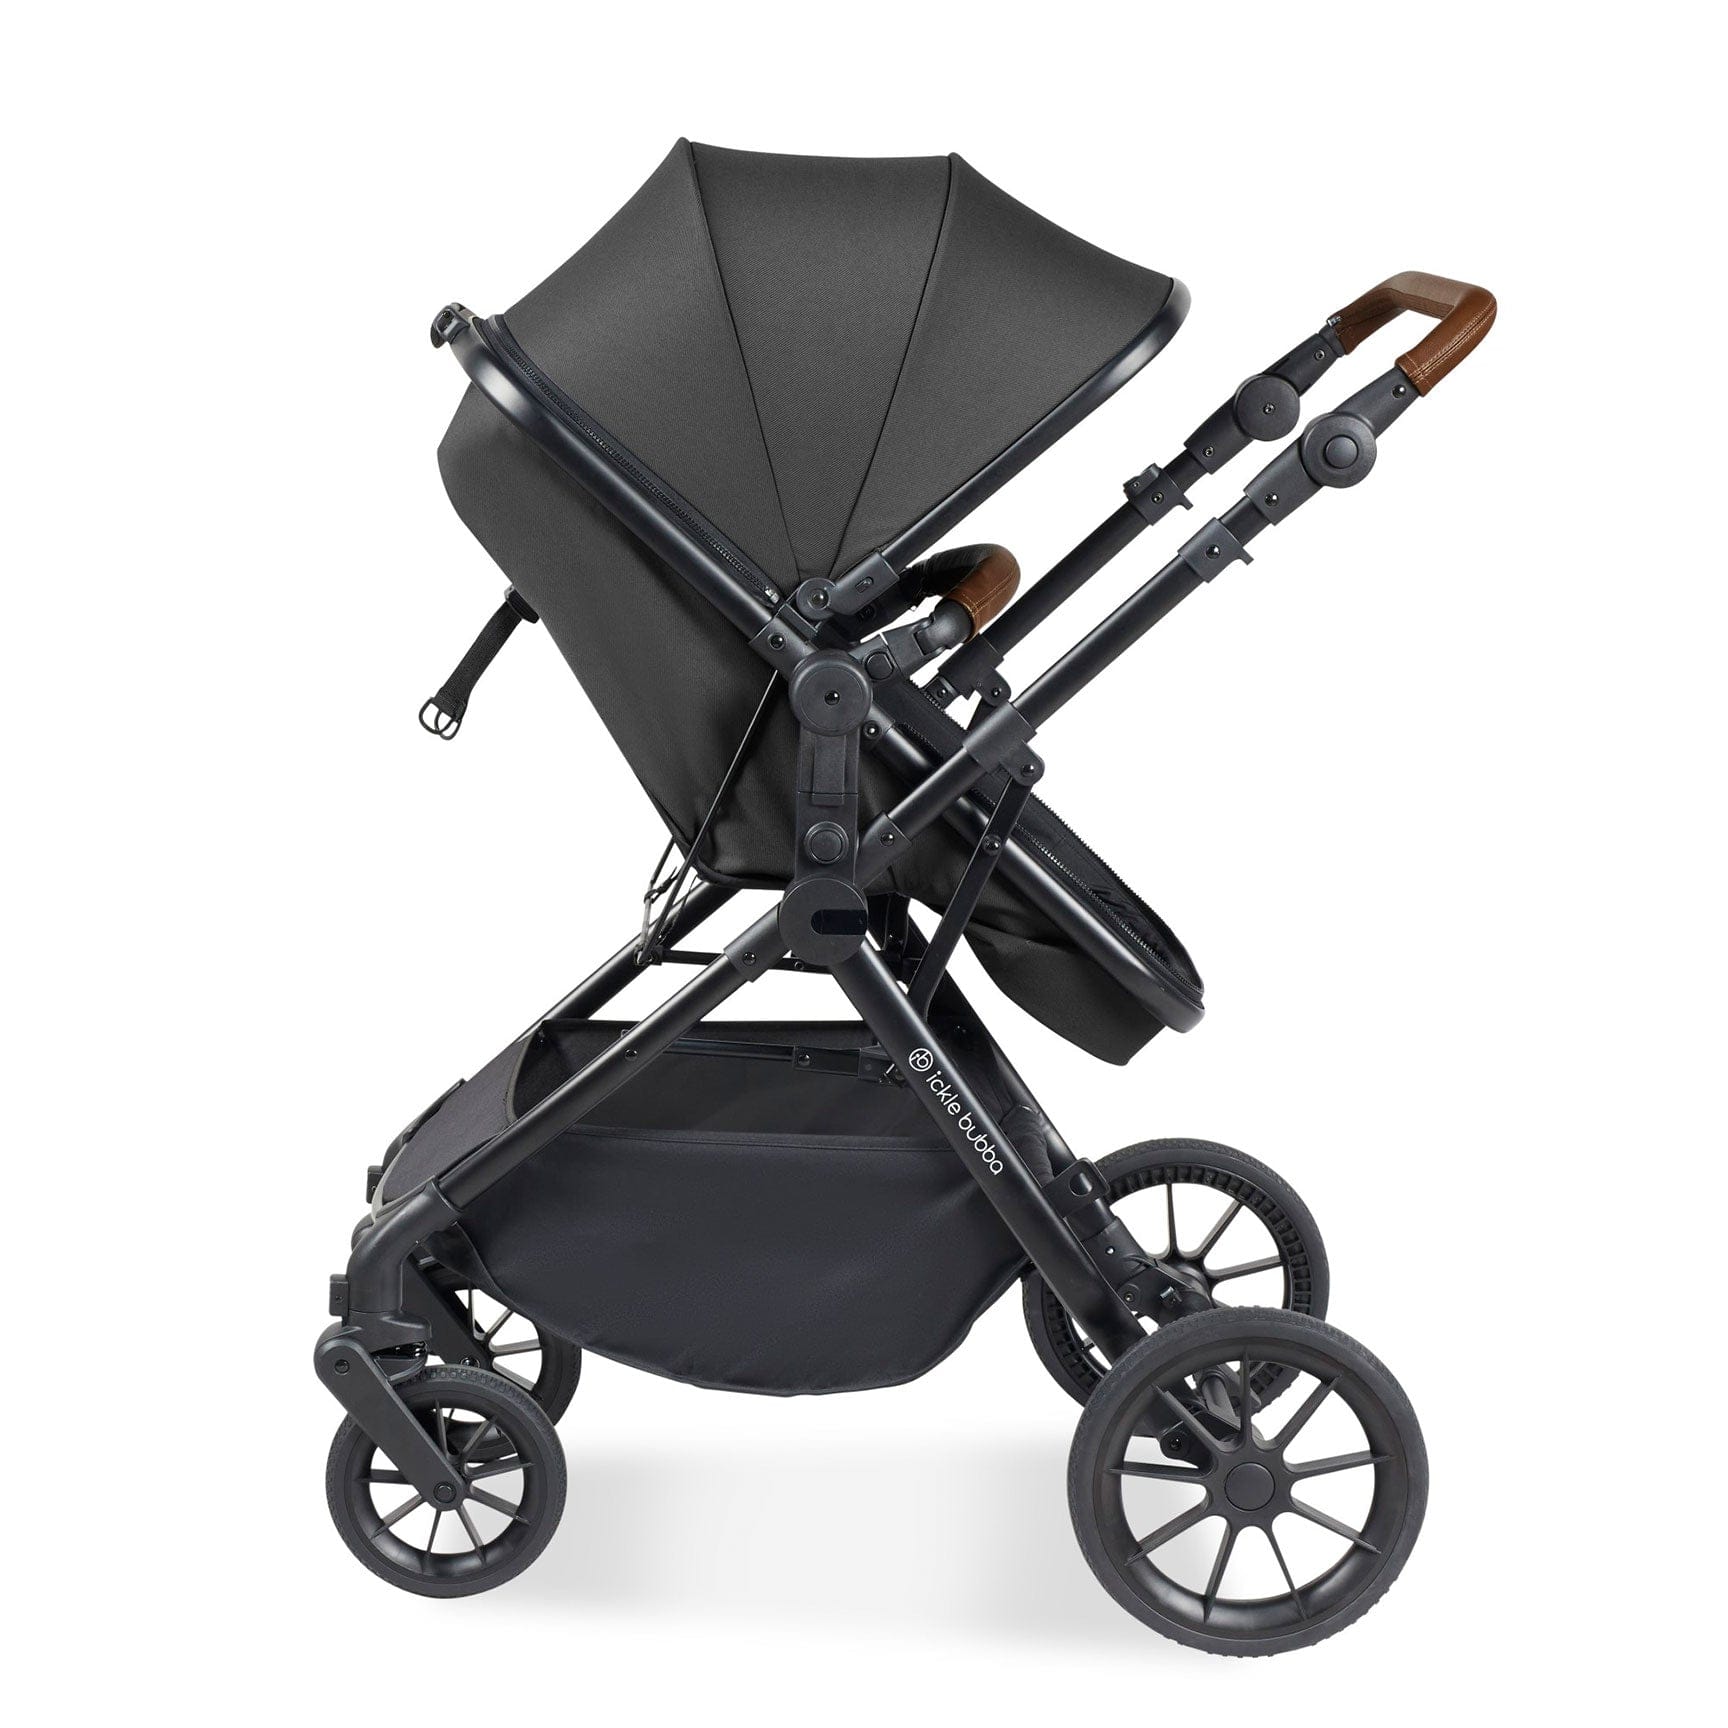 Ickle Bubba Ickle Bubba Cosmo 2 in 1 Plus Carrycot & Pushchair in Black/Graphite Grey Travel Systems 10-007-001-007 5056515025620